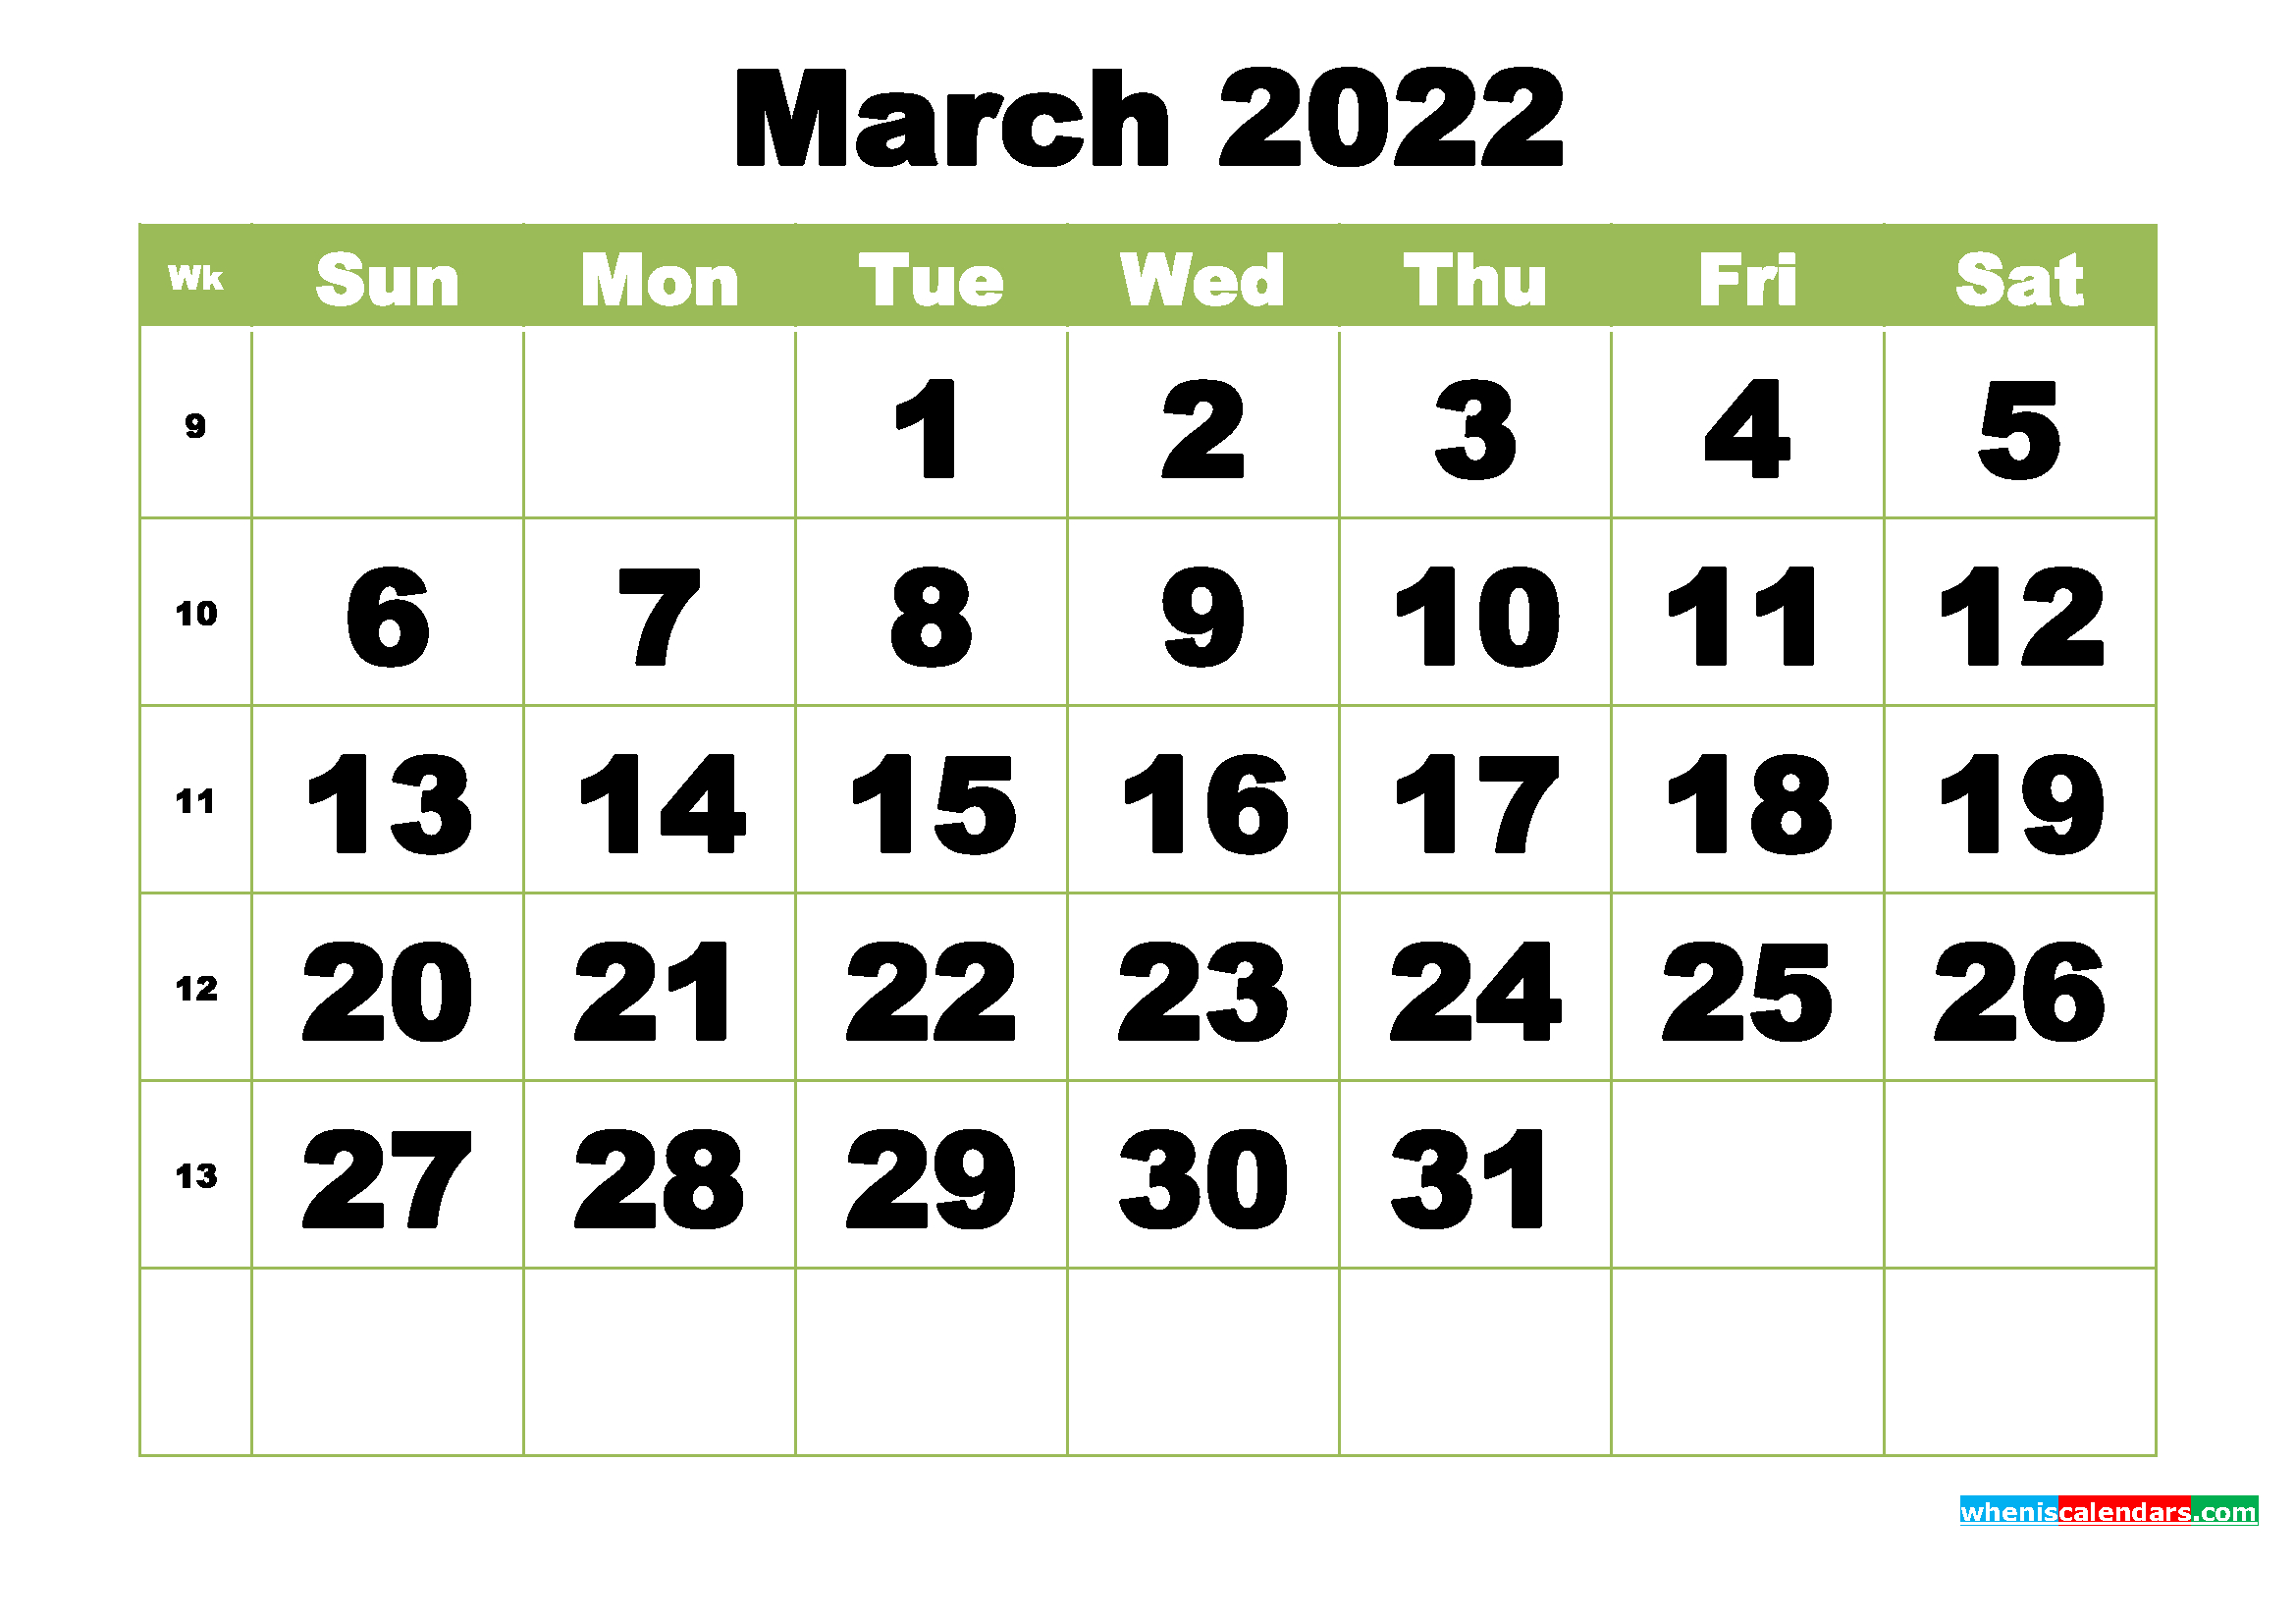 Take Calendar 2022 March With Festivals